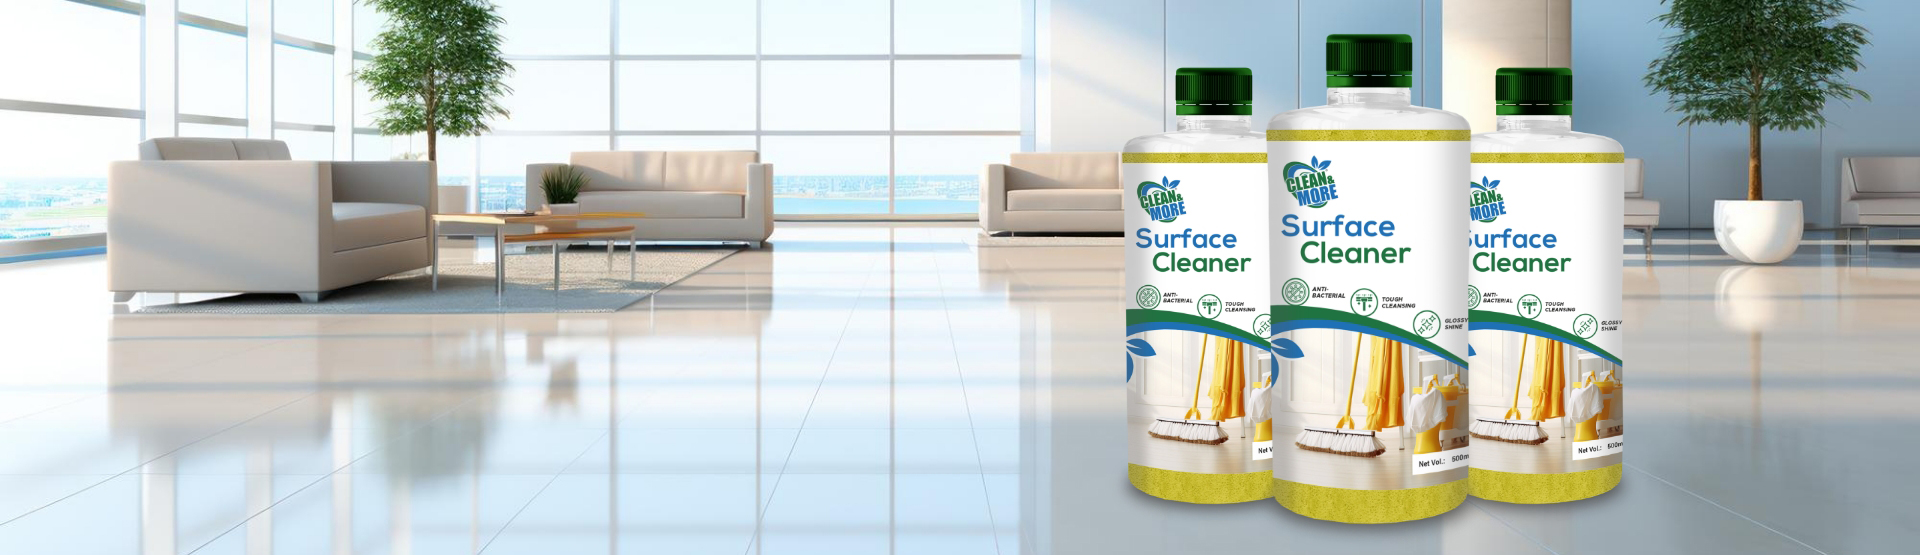 surface-cleaner-banner